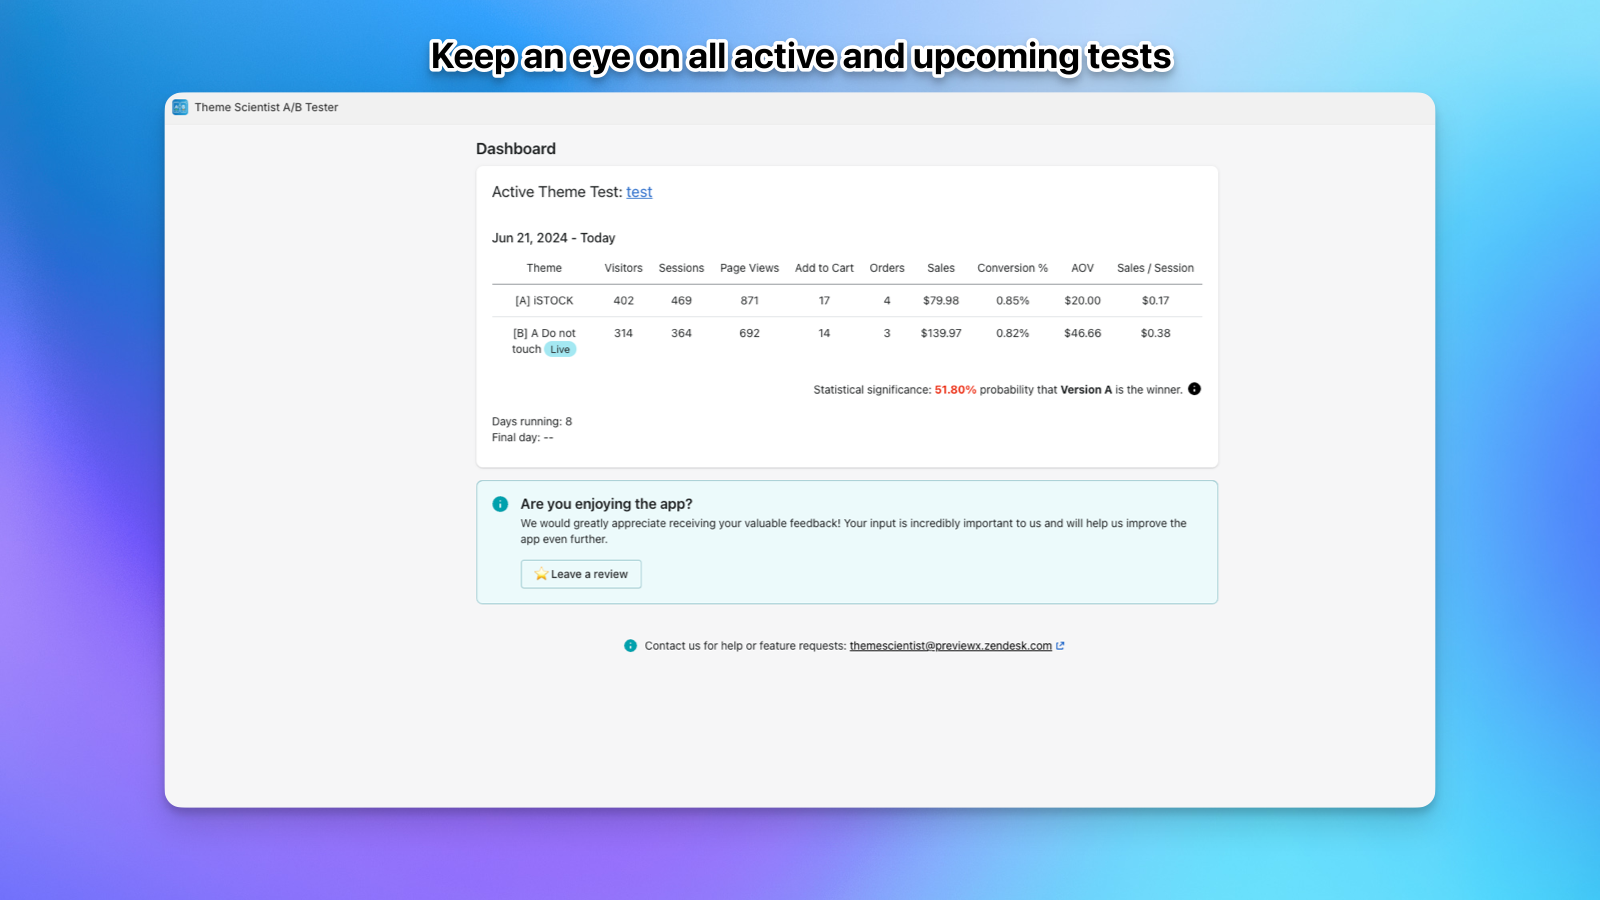 Dashboard for AB testing stats such as conversion rate